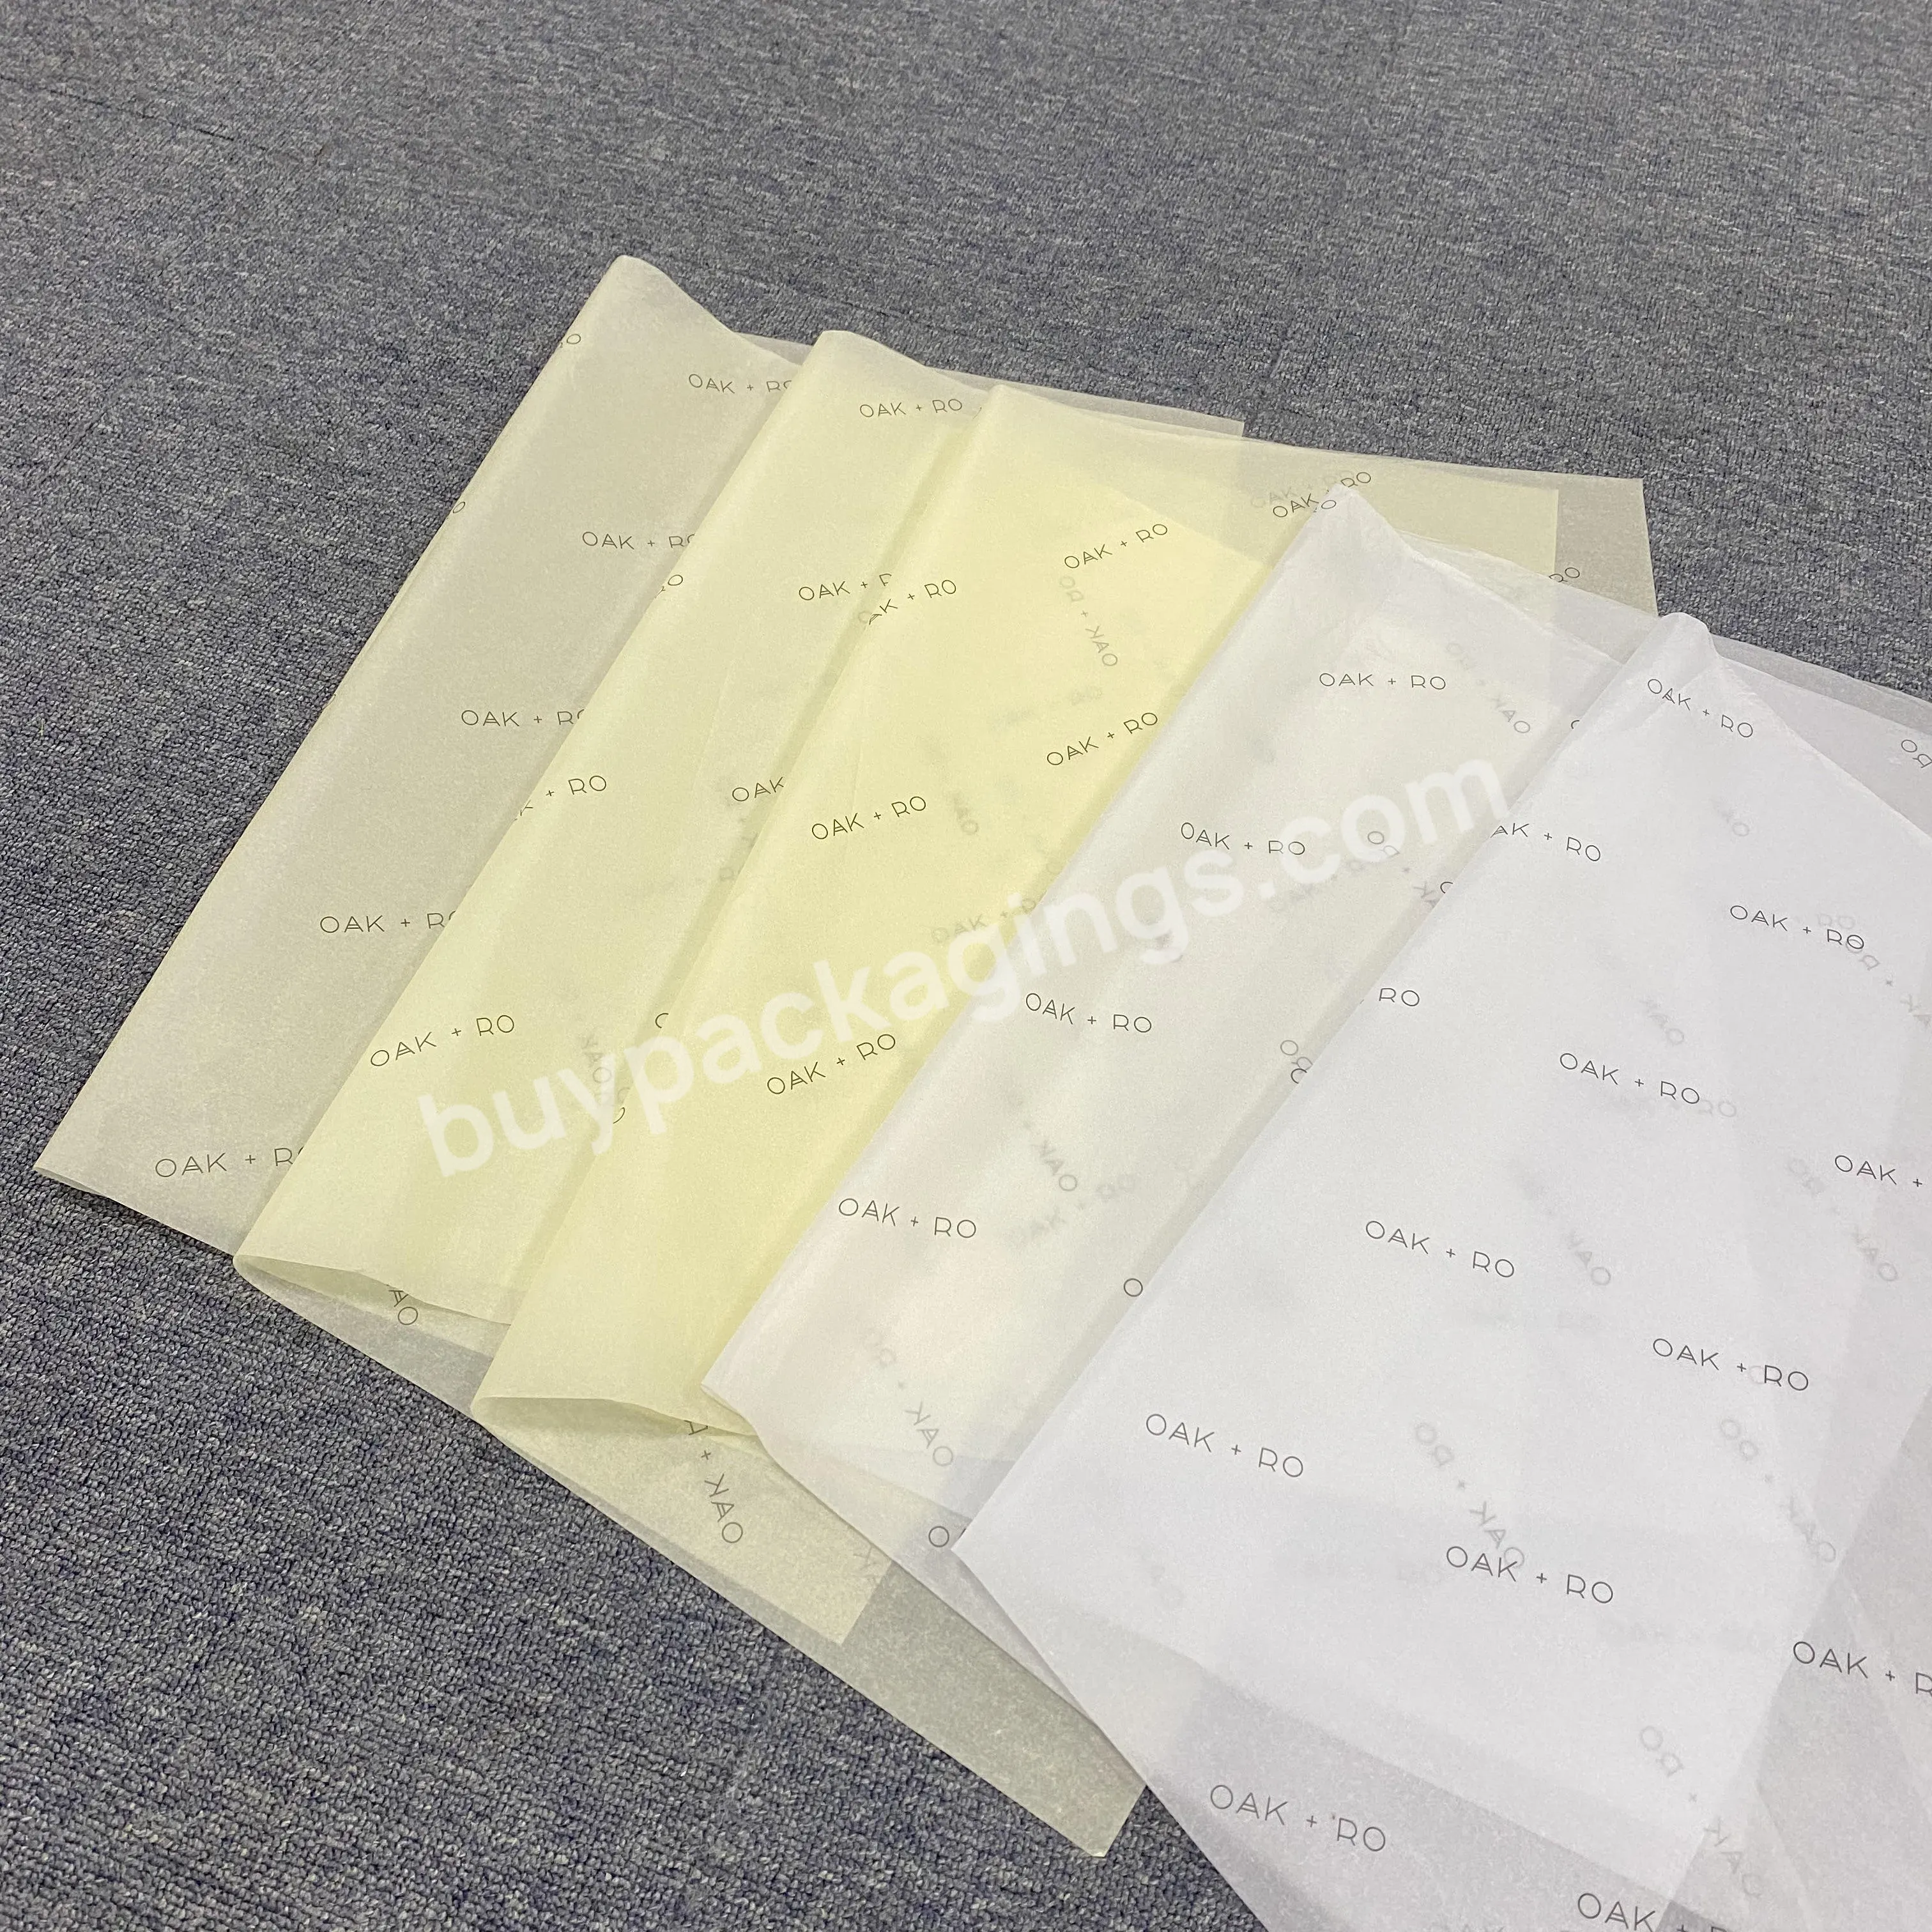 China Wholesale High Quality Low Moq Wrapping Tissue Paper Customize Any Size Logo Print Gift Packaging With Brand Flower Tissue - Buy Low Moq Wrapping Tissue Paper,Customize Any Size Logo Print,Gift Packaging With Brand Flower Tissue.